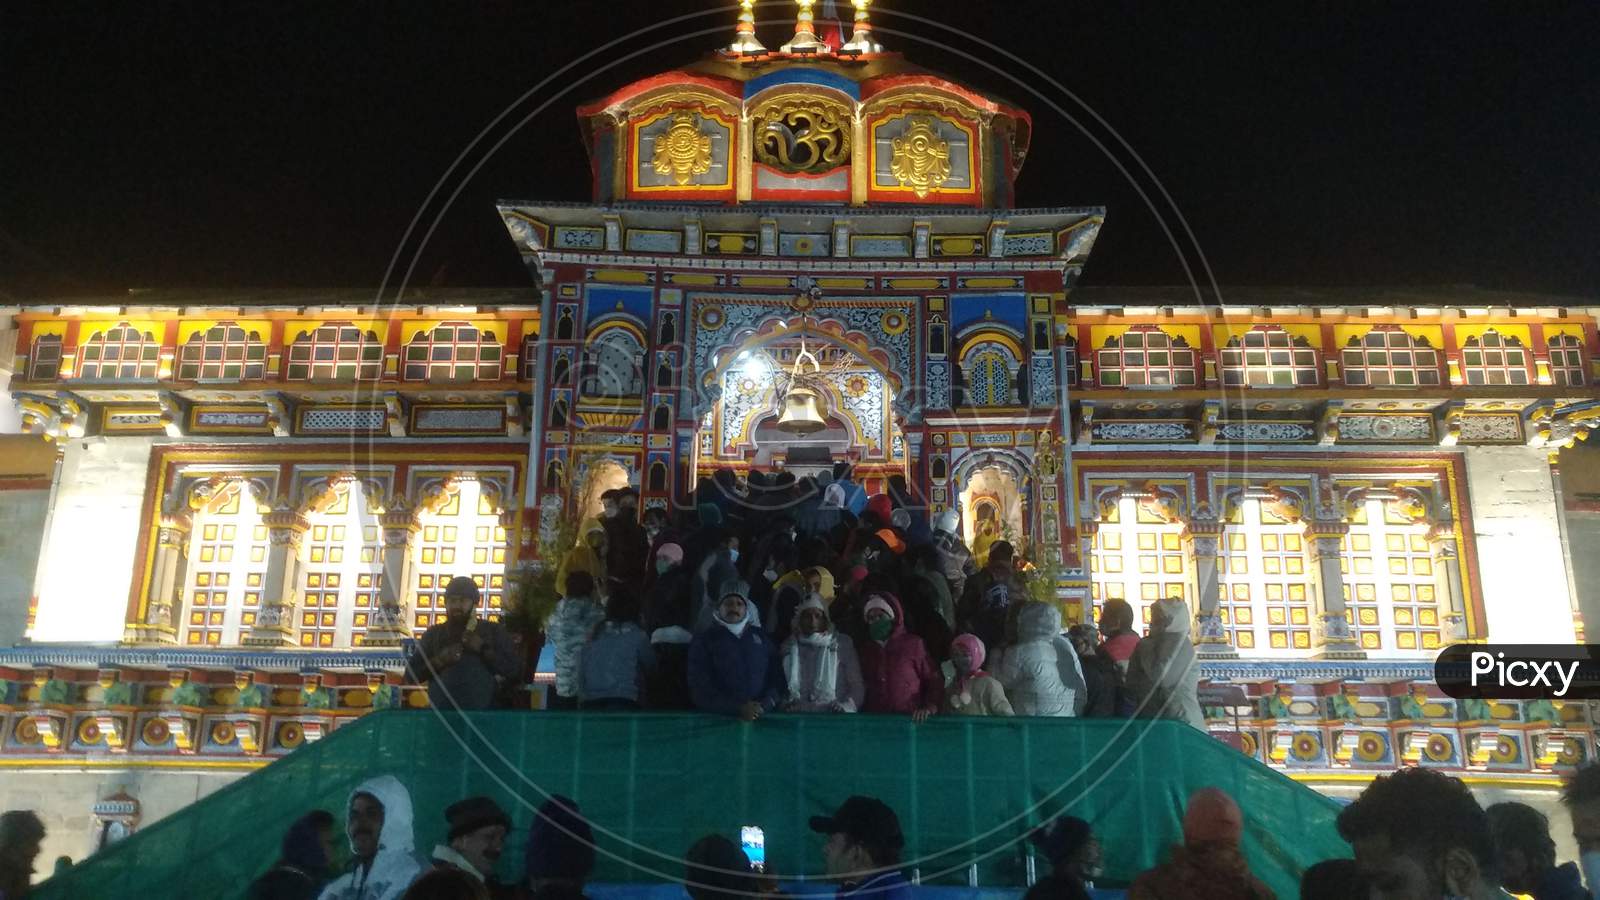 Night view of badrinath temple | Night, Places to visit, Temple